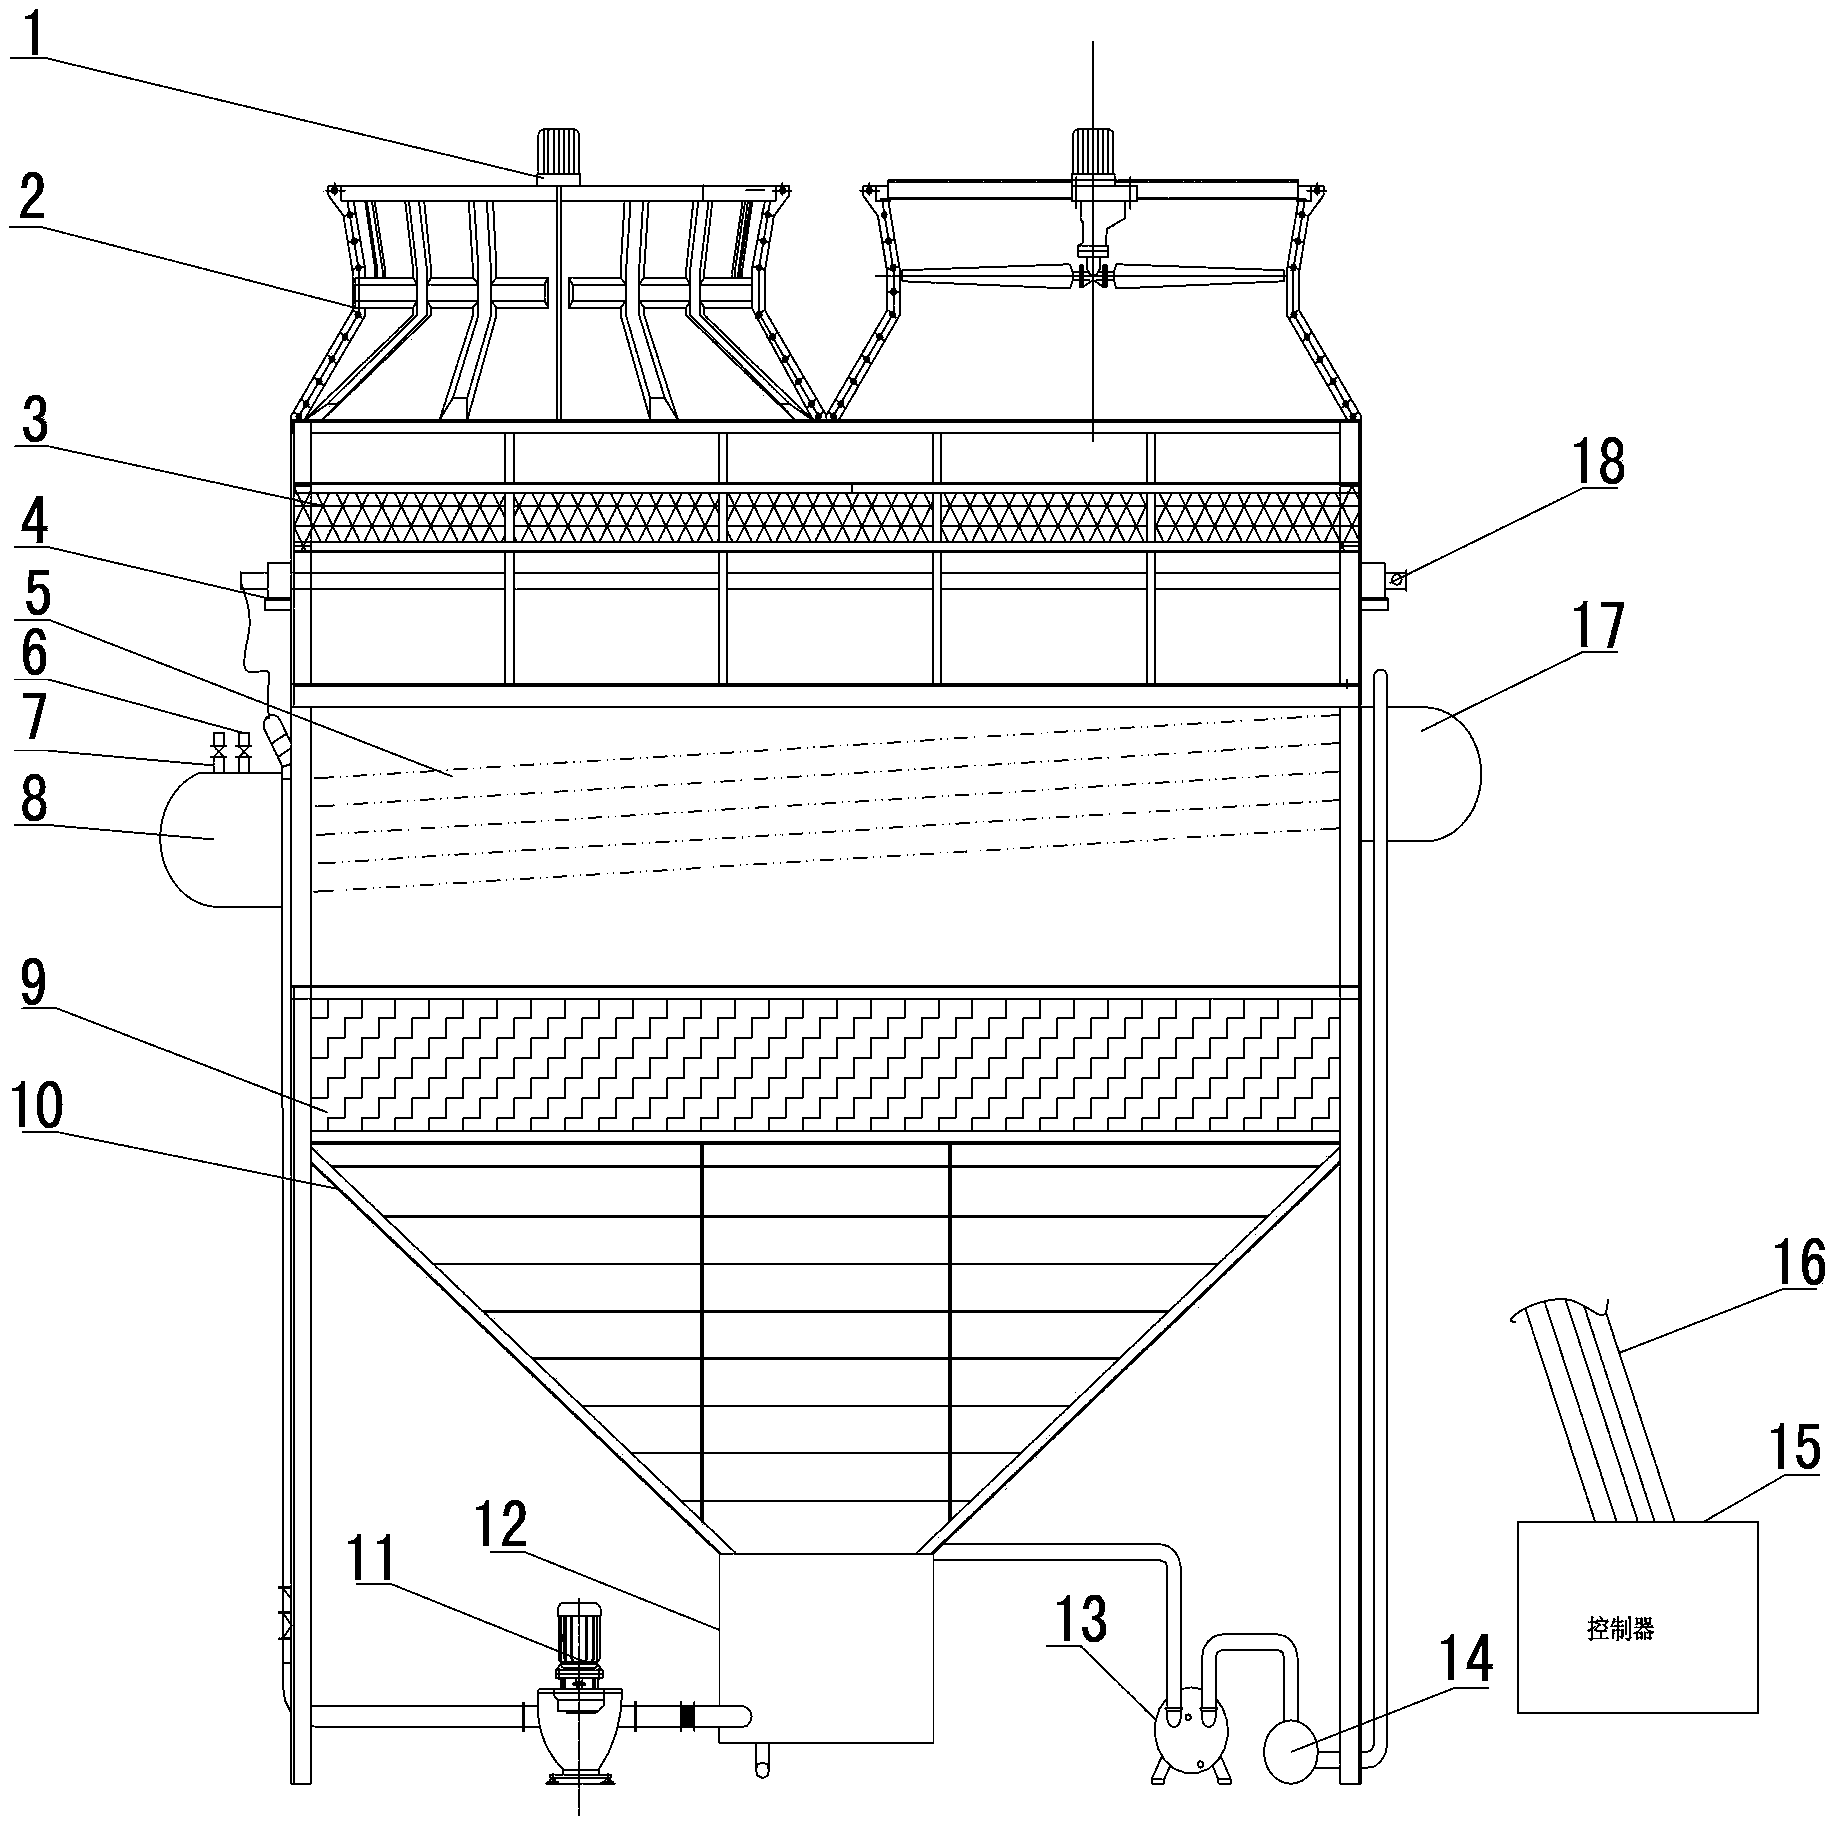 Thermosyphon waste heat power generating system